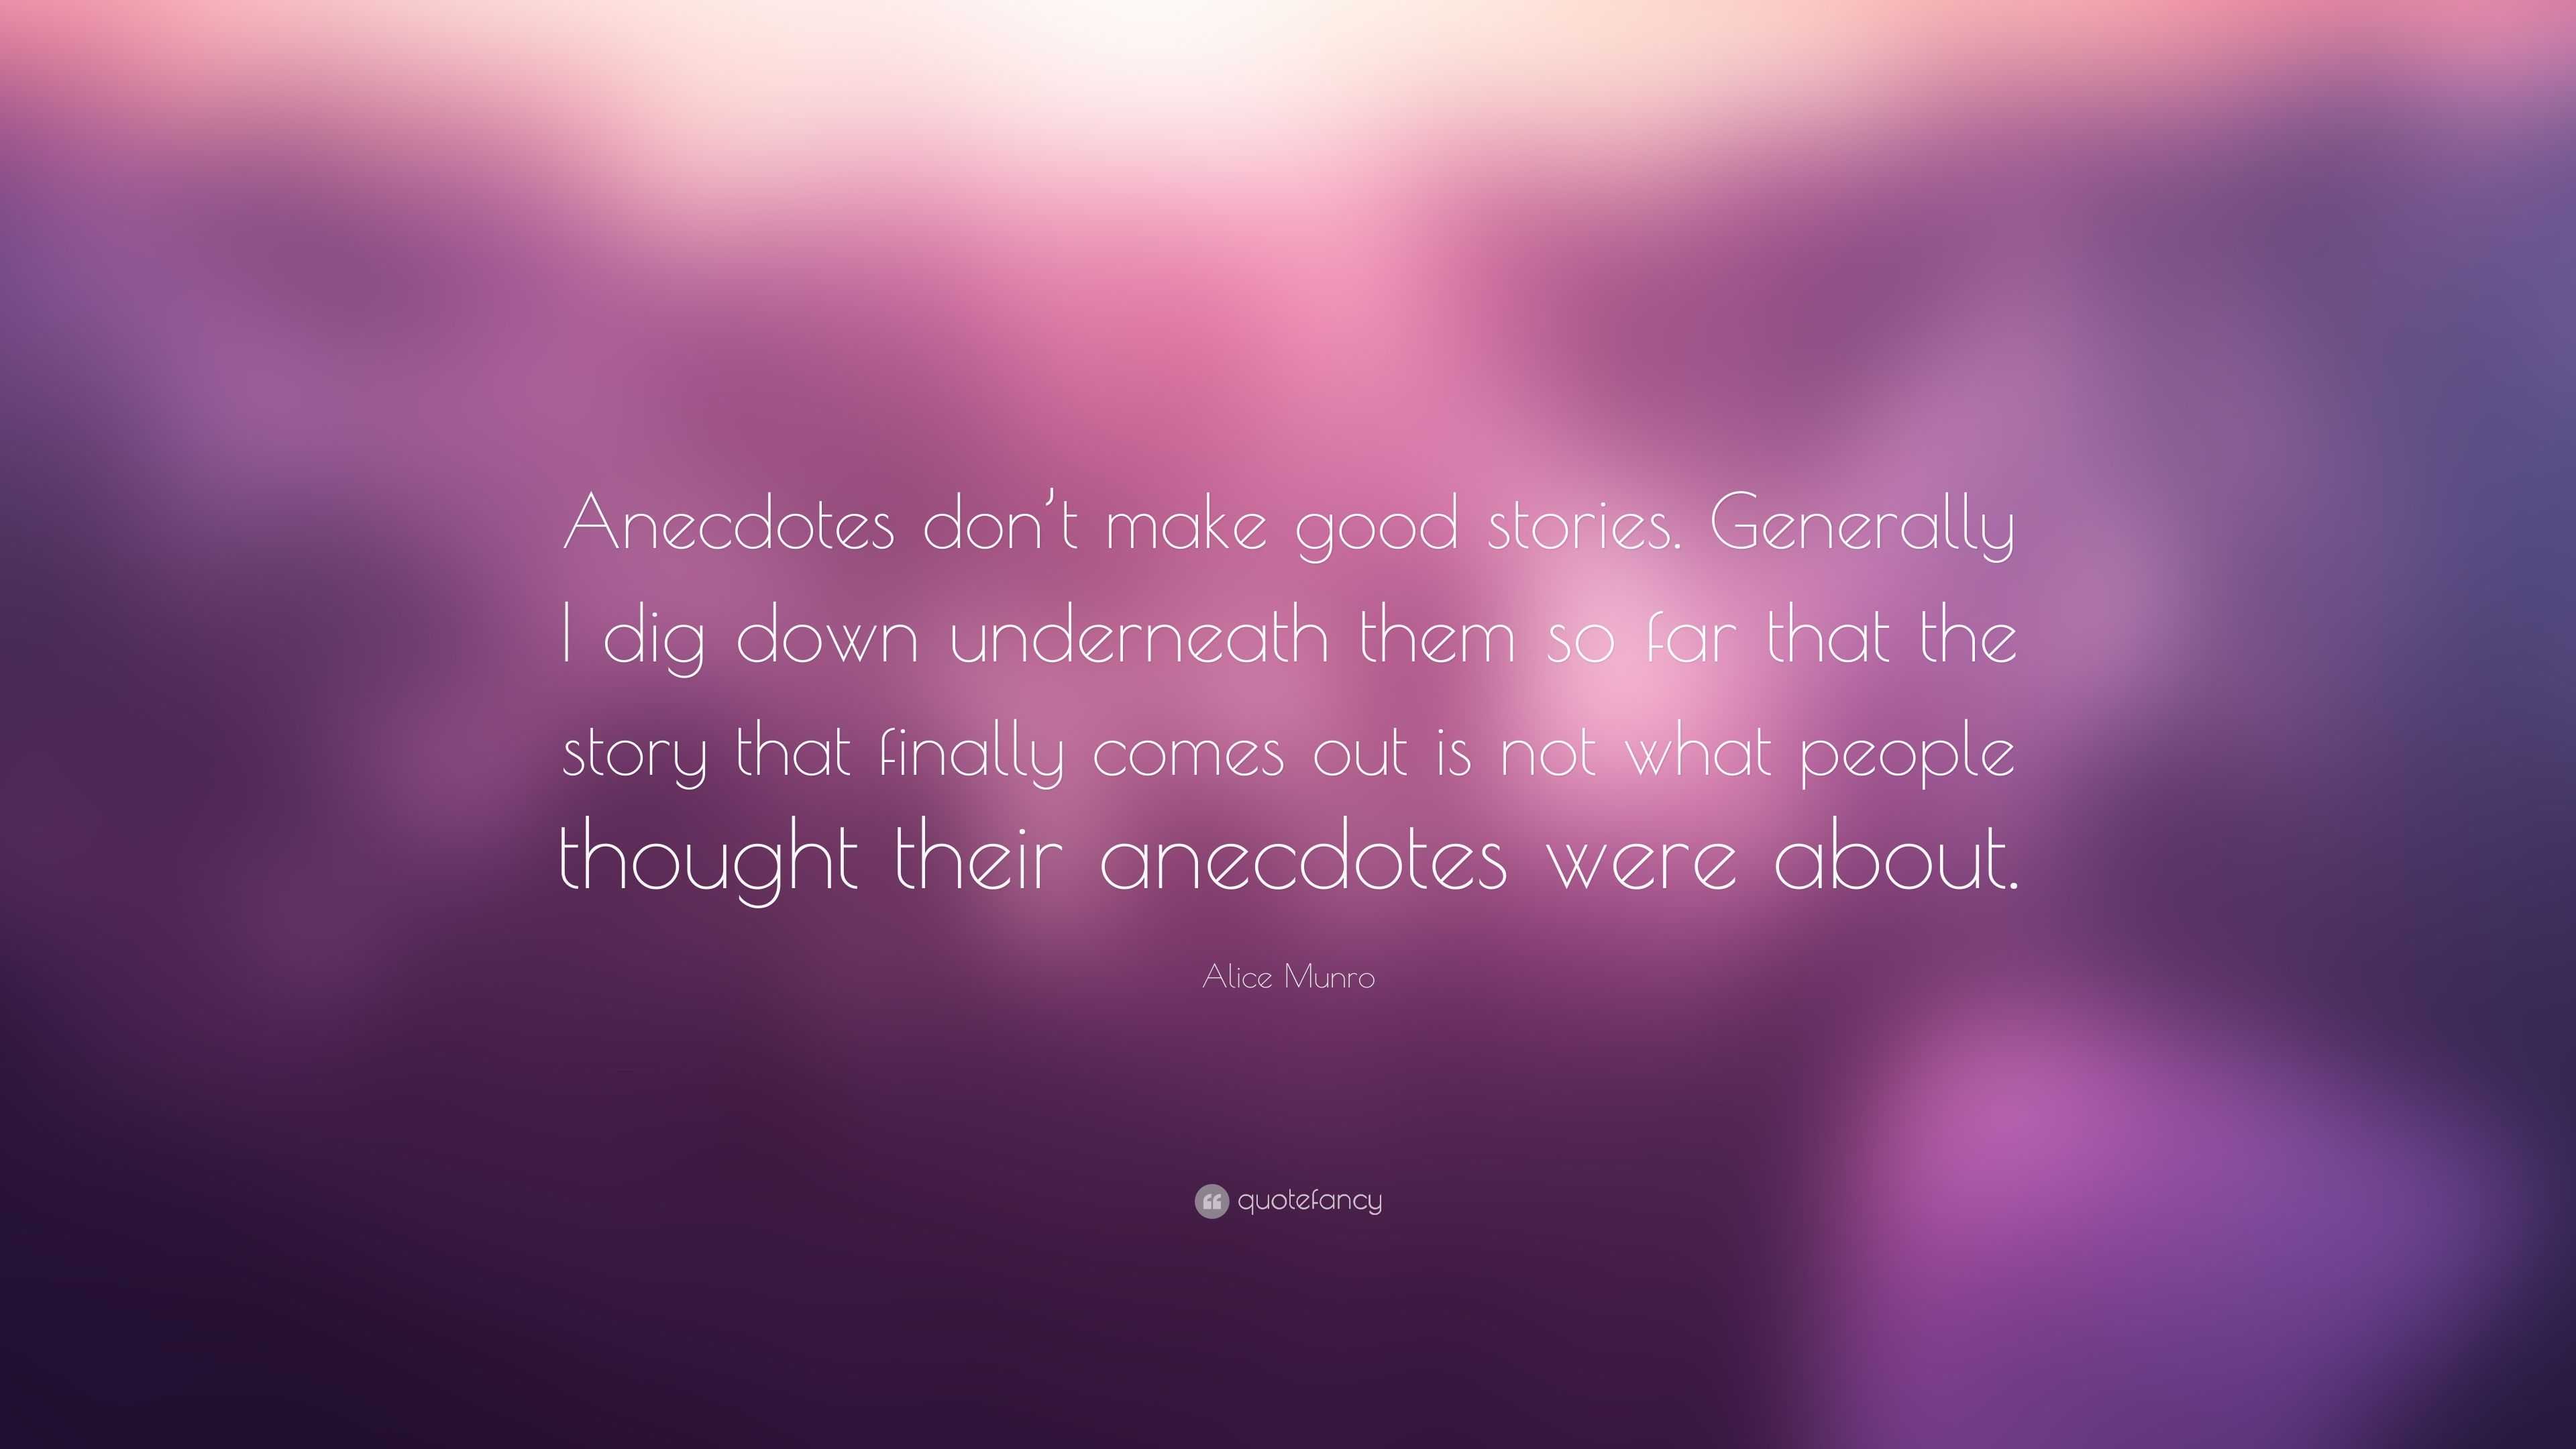 Alice Munro Quote: “Anecdotes don’t make good stories. Generally I dig ...